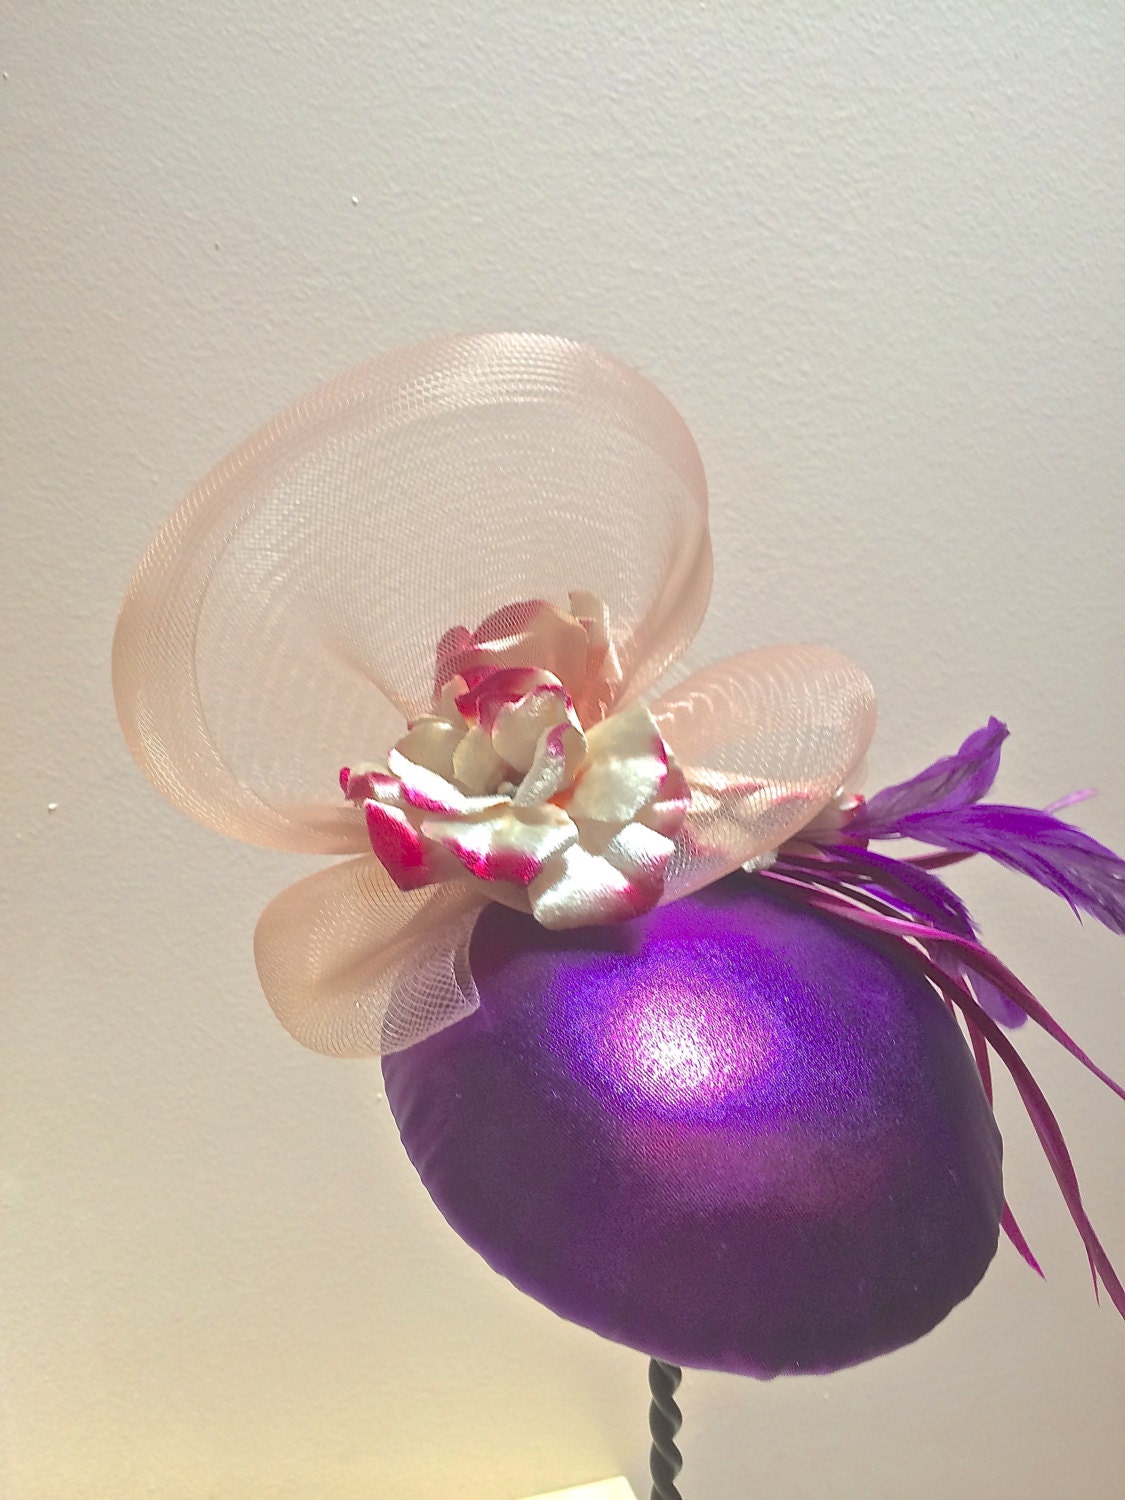 Radiant Orchid Fascinator, Purple fabric covered Fascinator with Crinoline and feathers, Wedding hat or Evening Cocktail Hat